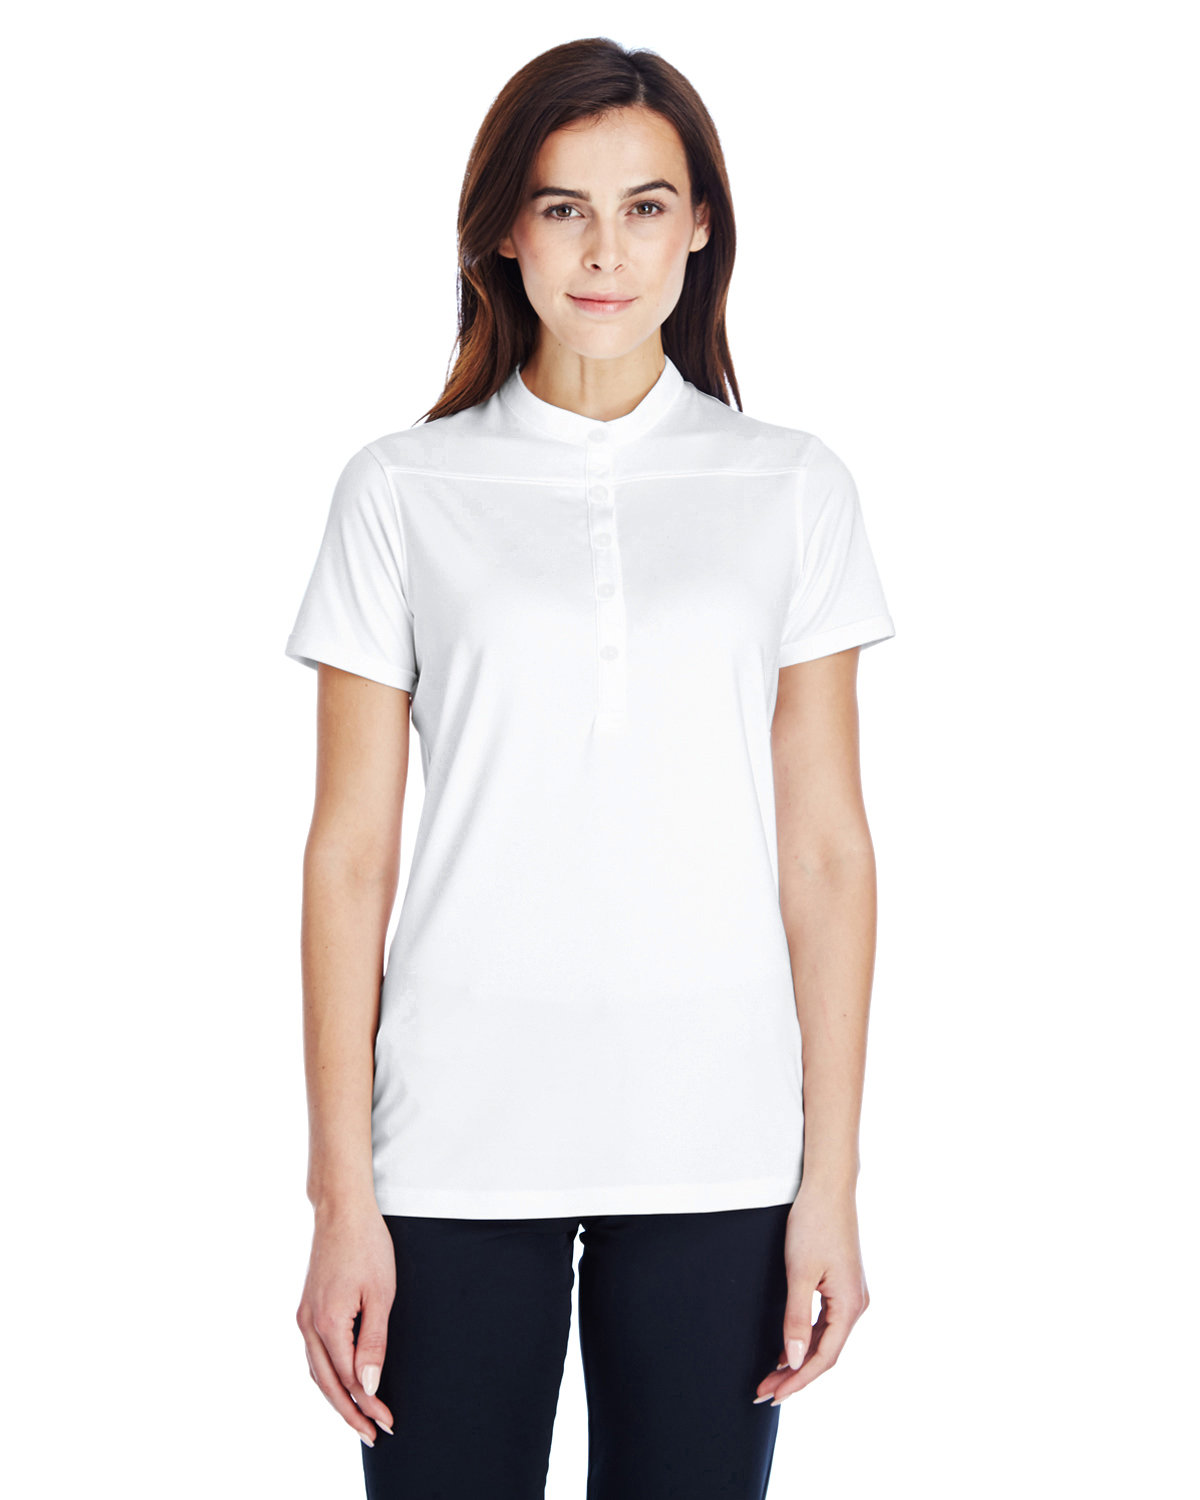 Buy Ladies Corporate Performance Polo 2.0 - Under Armour SuperSale ...